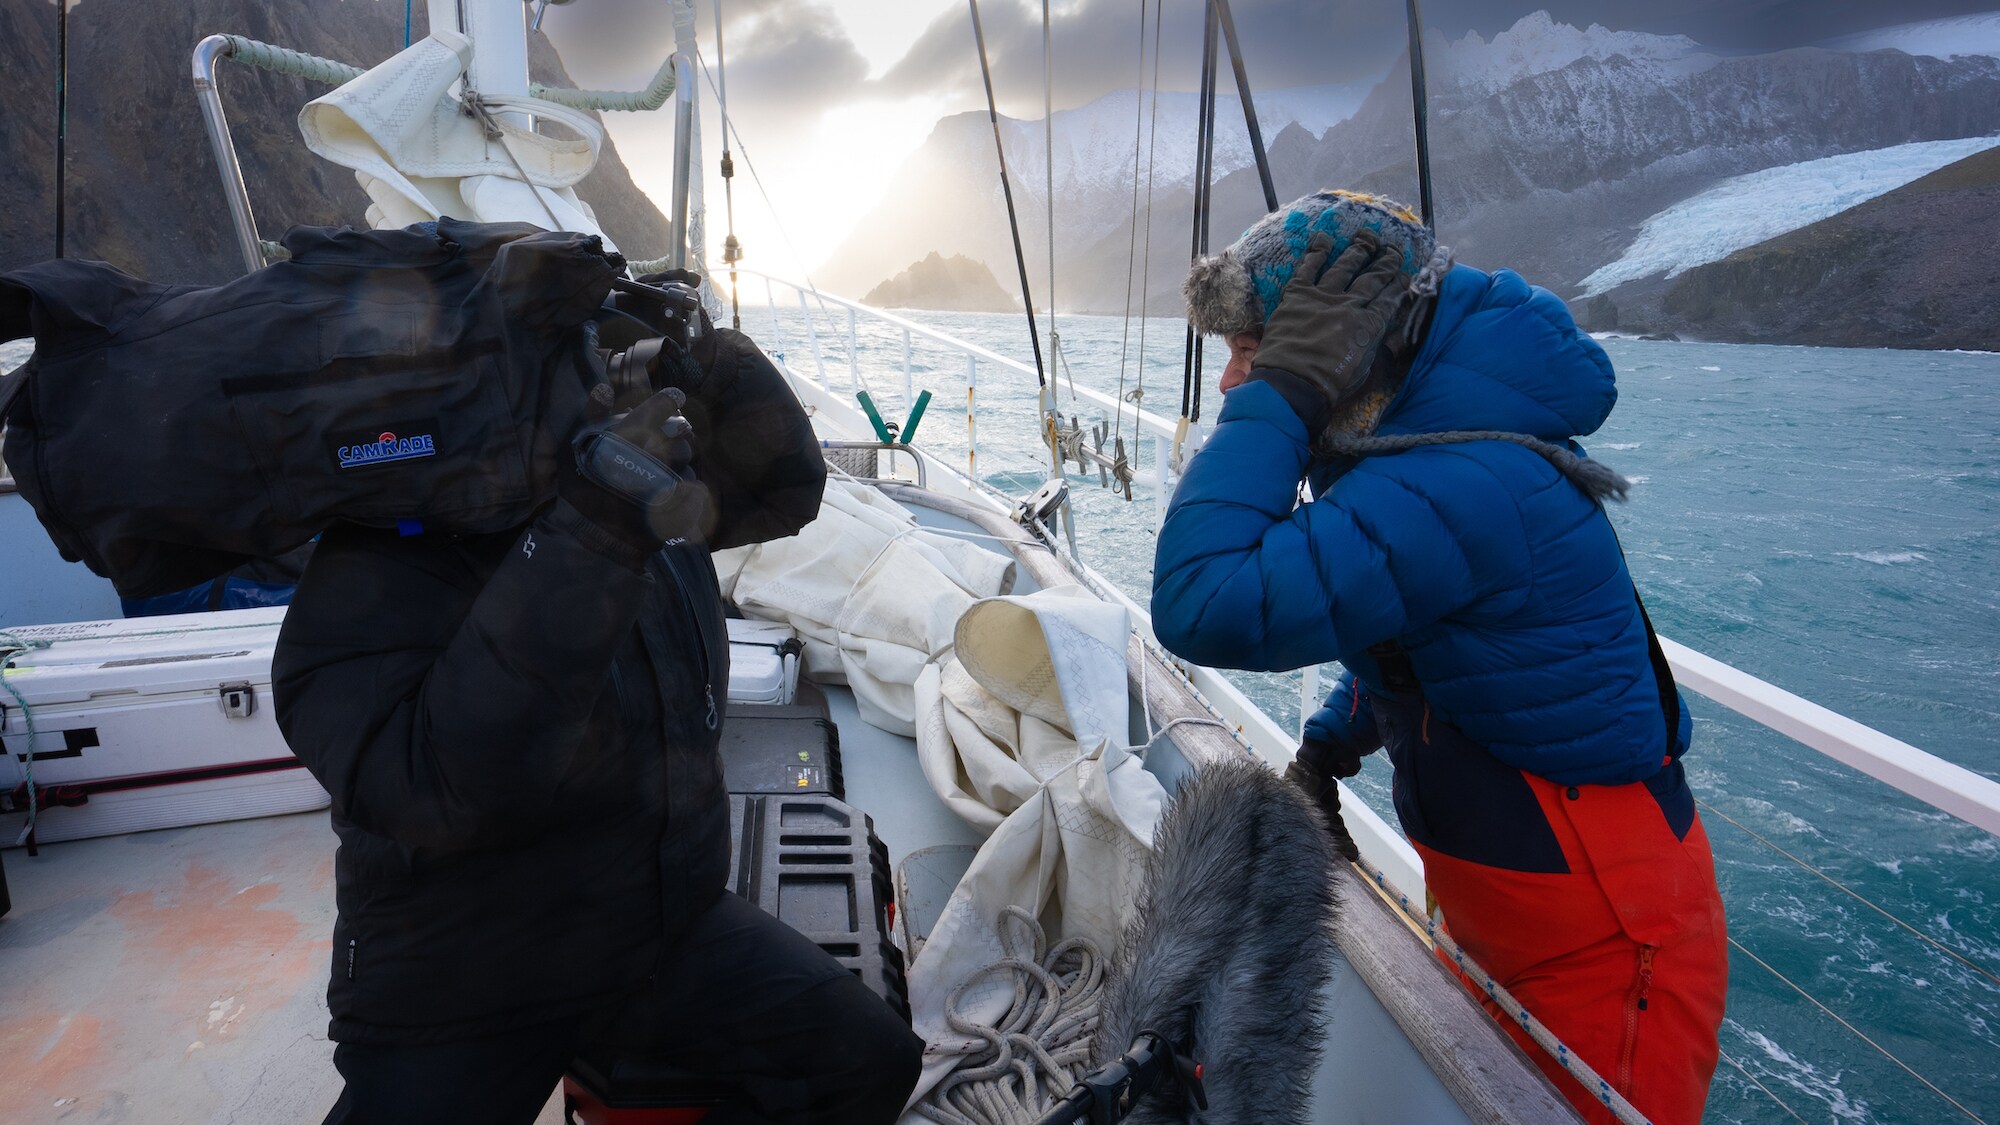 Director Will West (L) films Bertie Gregory off Elephant Island. (Credit: National Geographic/Hector Skevington-Postles)